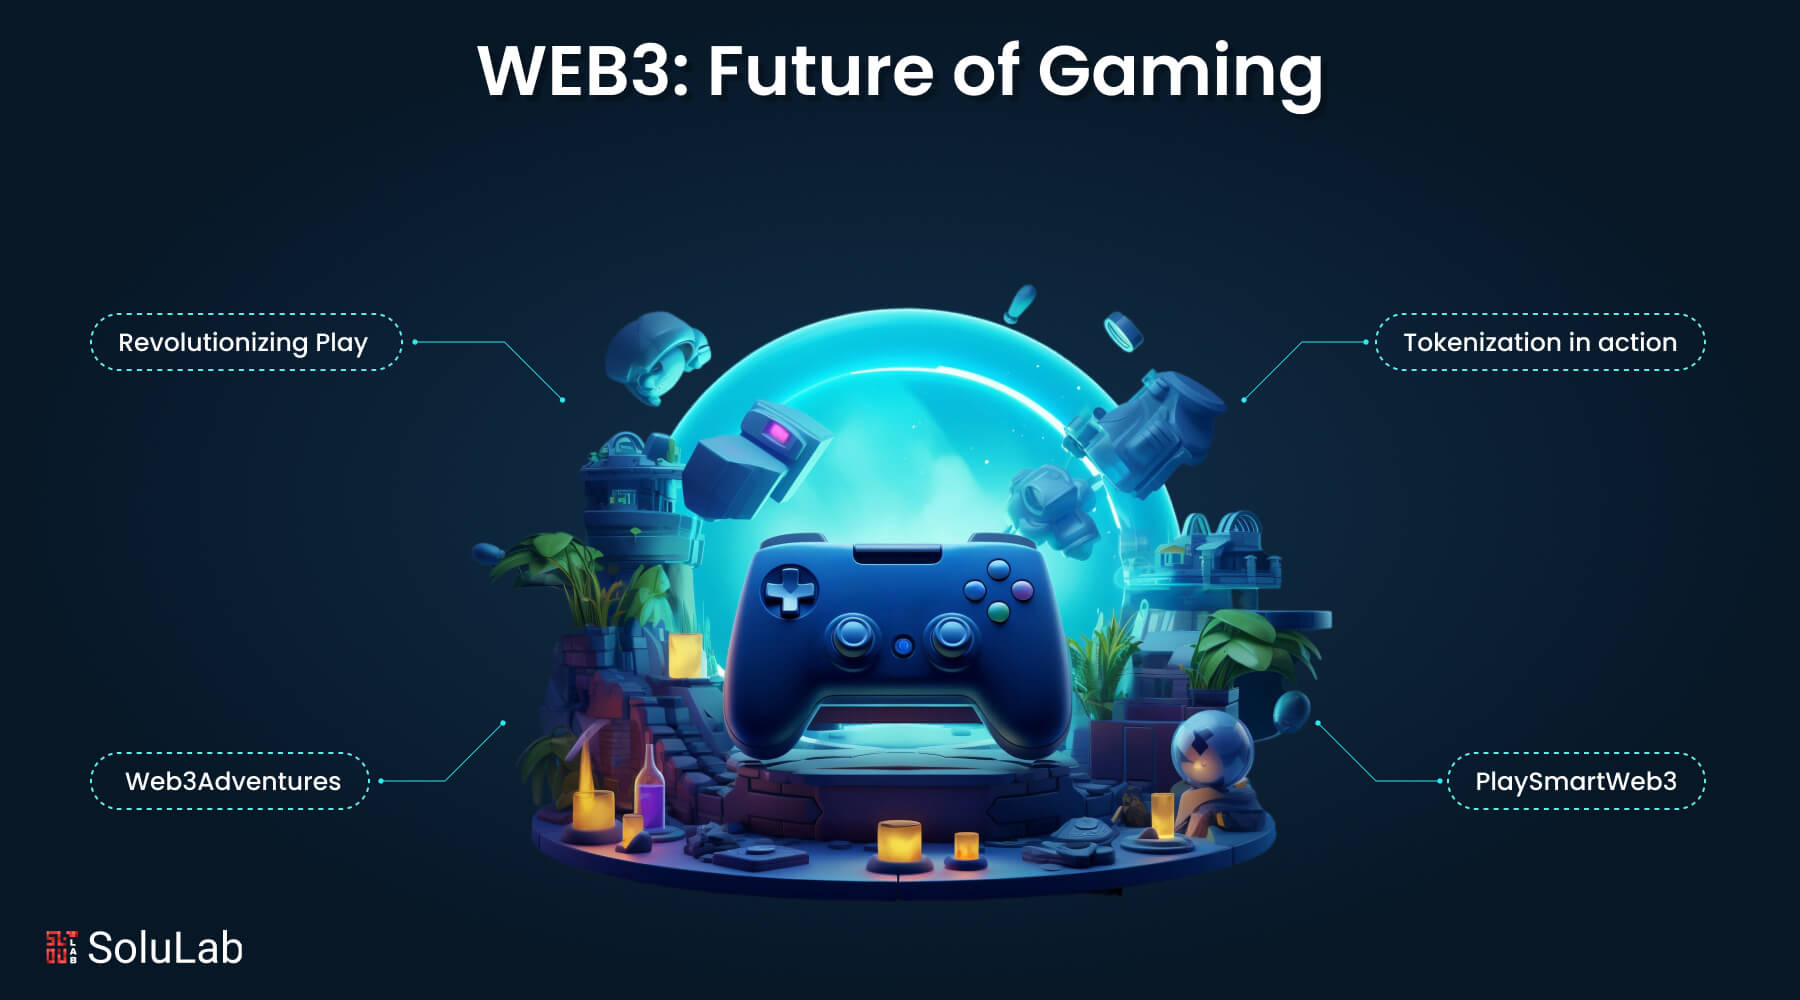 Web3 - The Future of Gaming